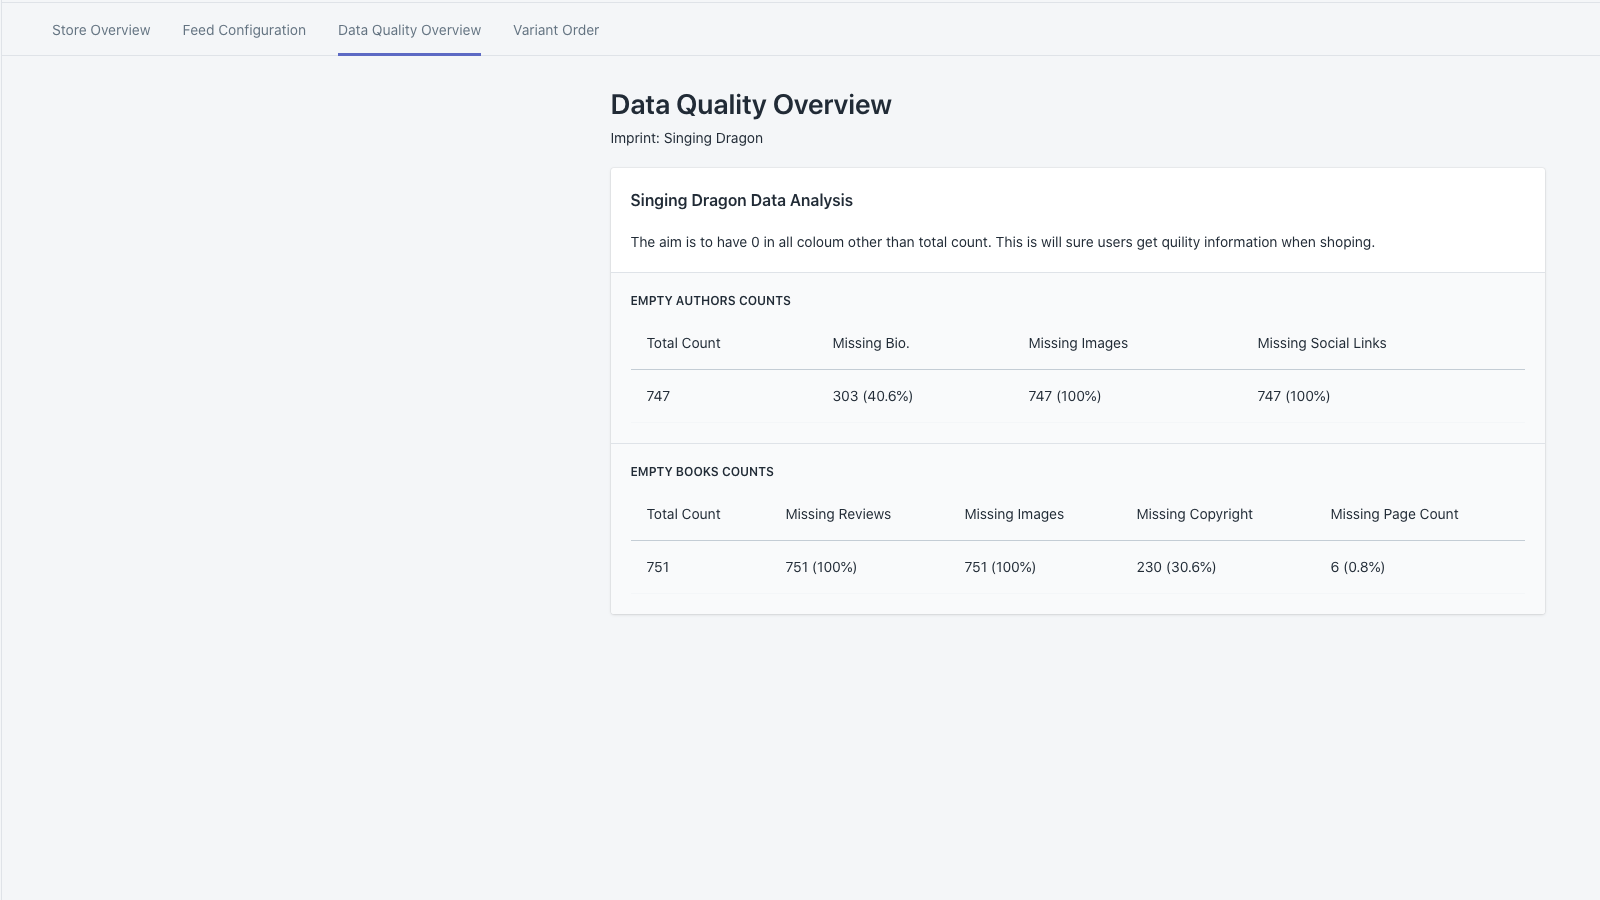 Data Quality Overview